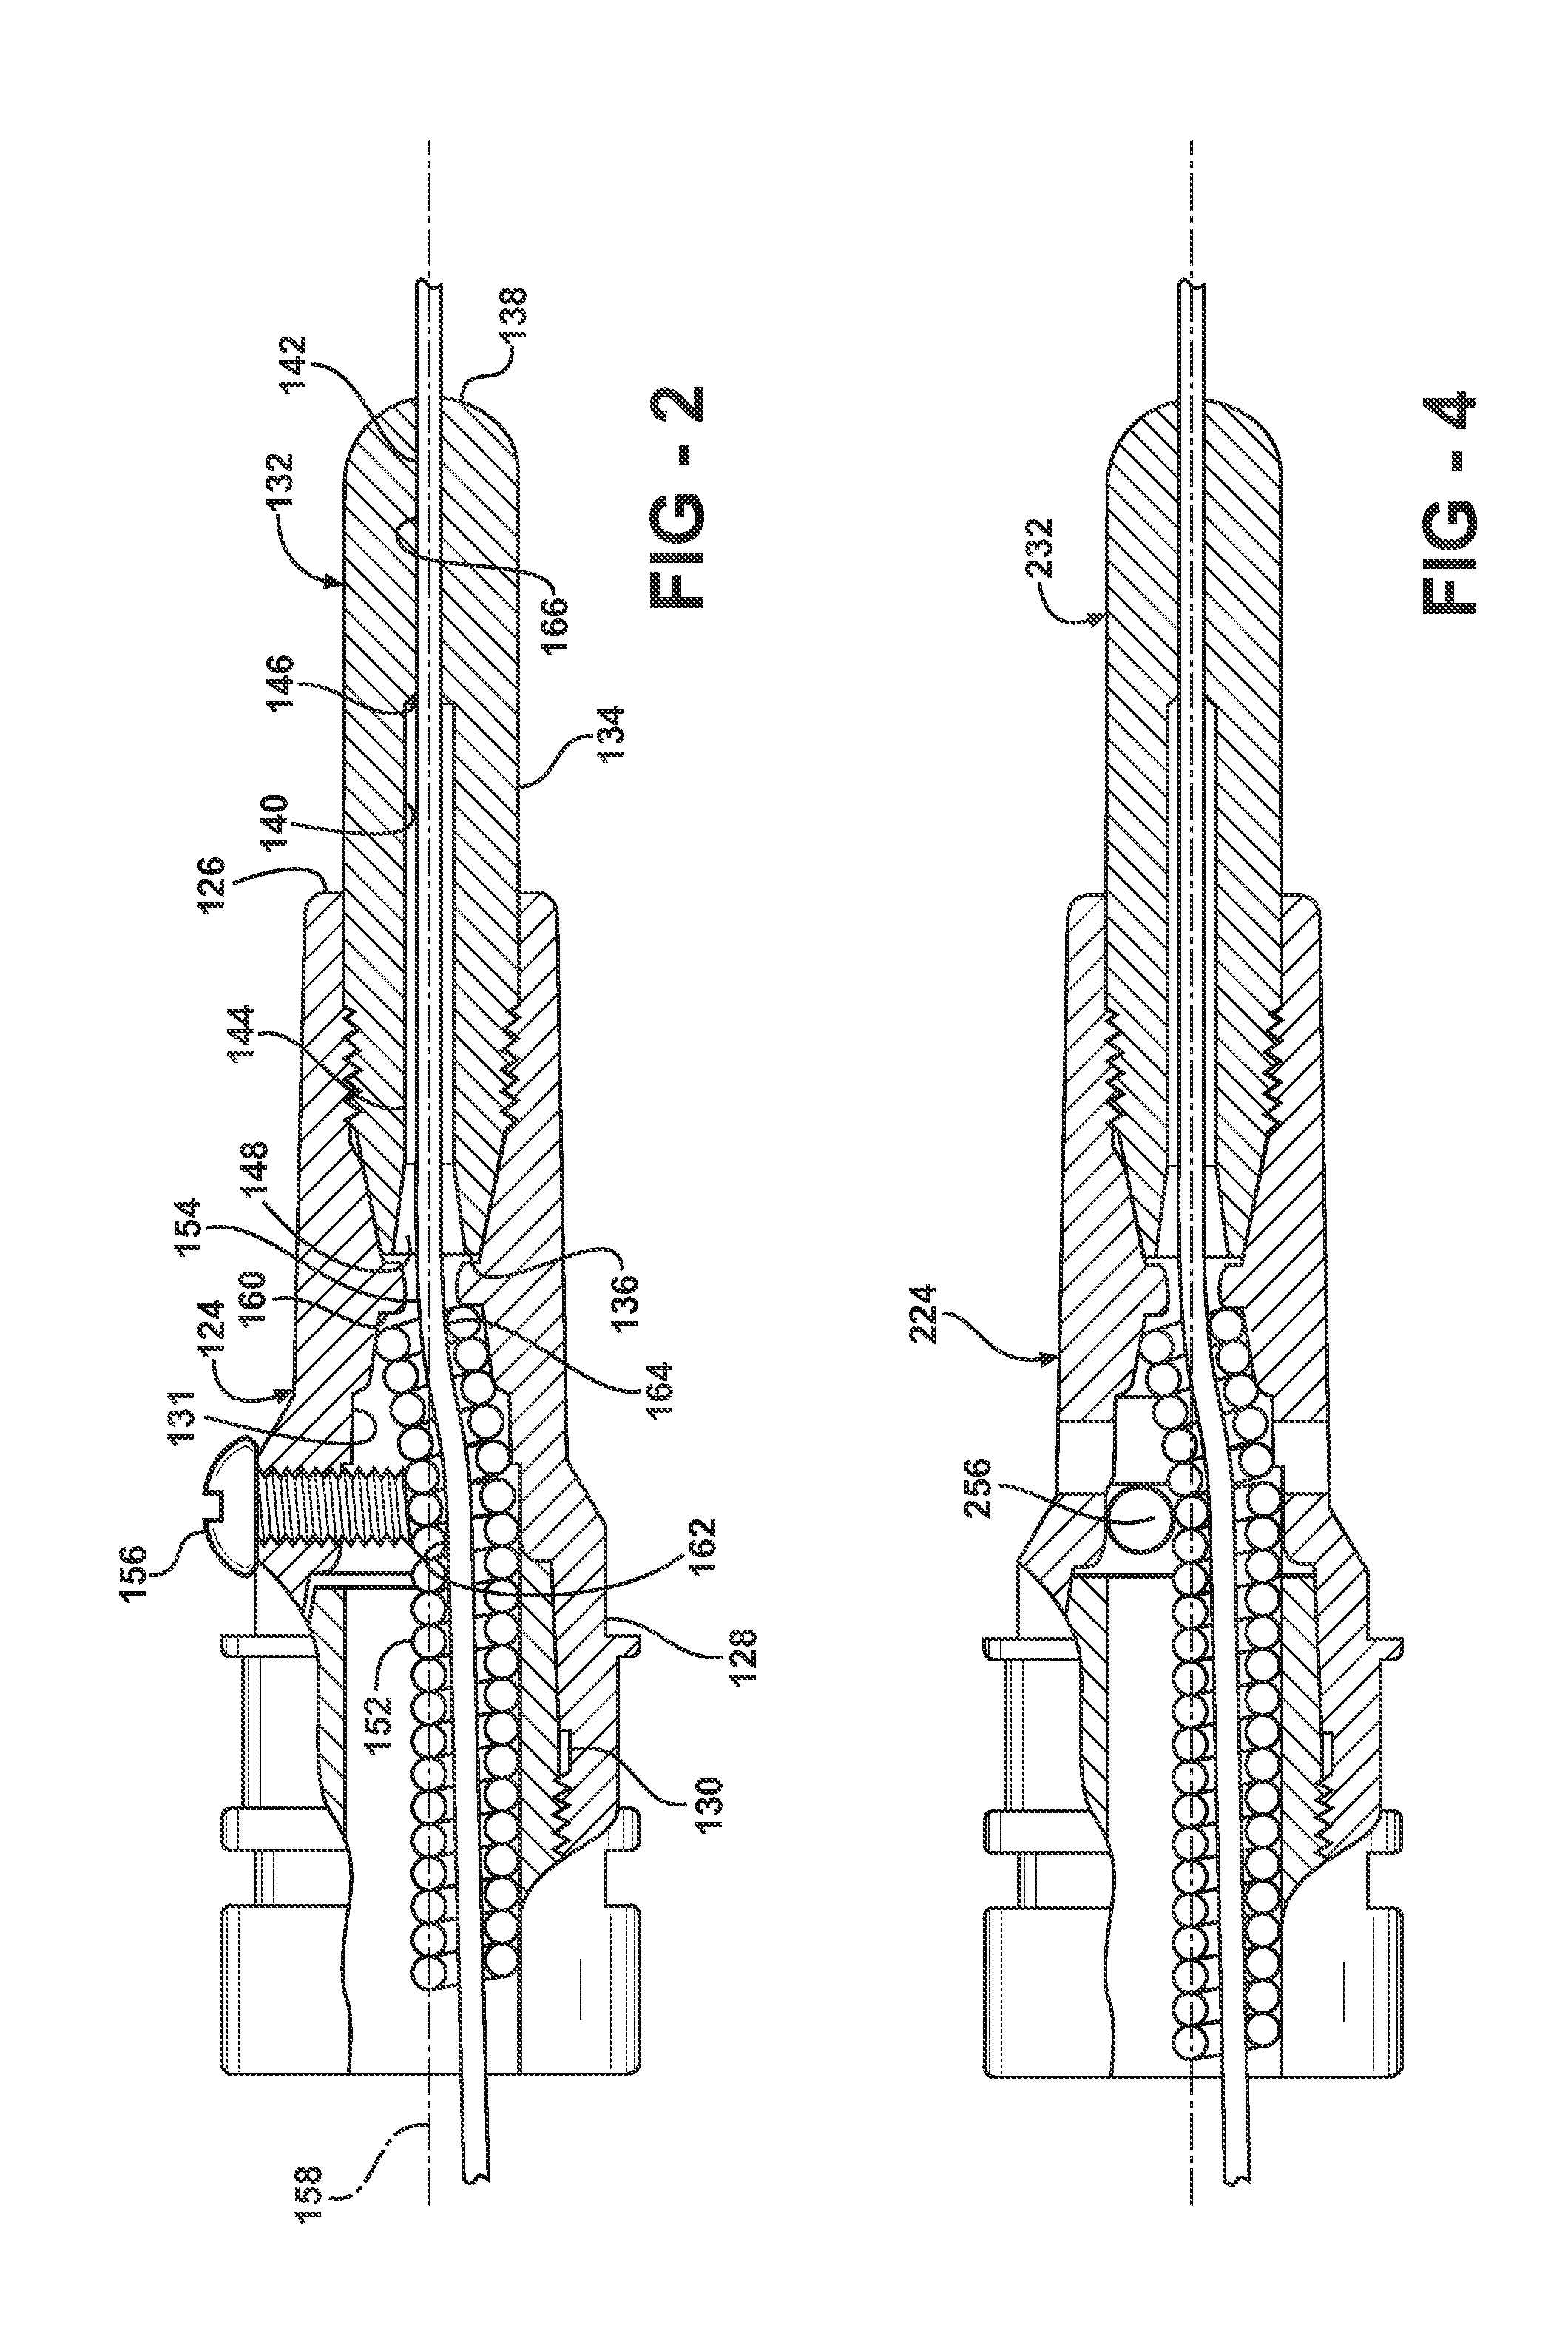 Retaining head and contact tip for controlling wire contour and contacting point for gmaw torches